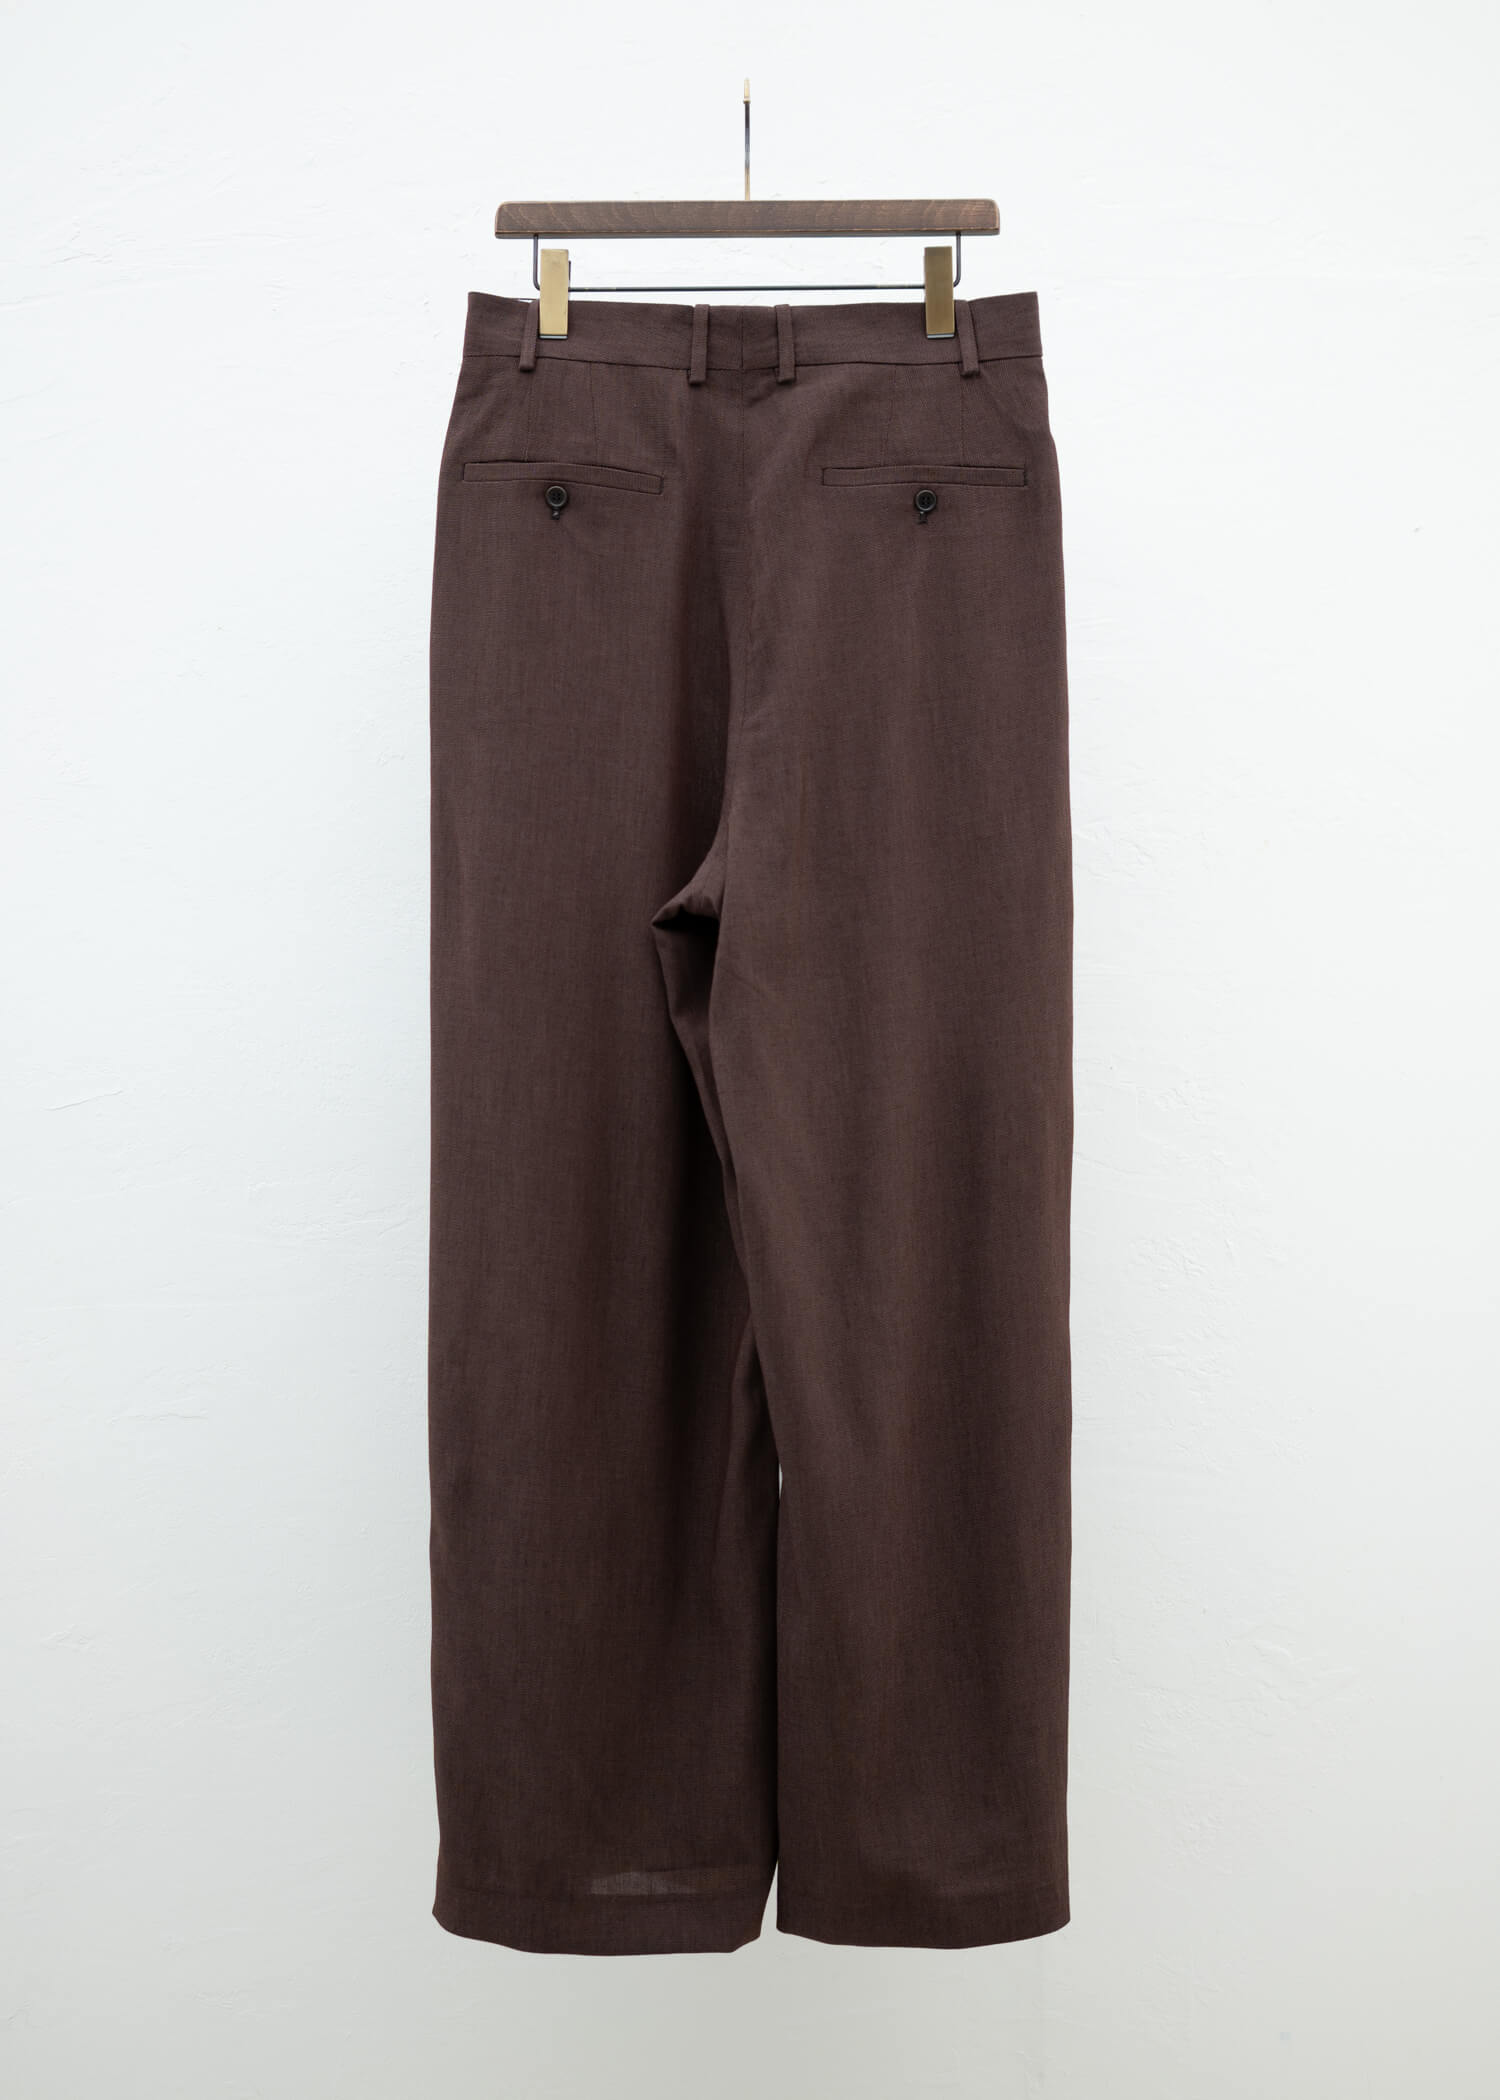 HED MAYNER Elongated Trousers